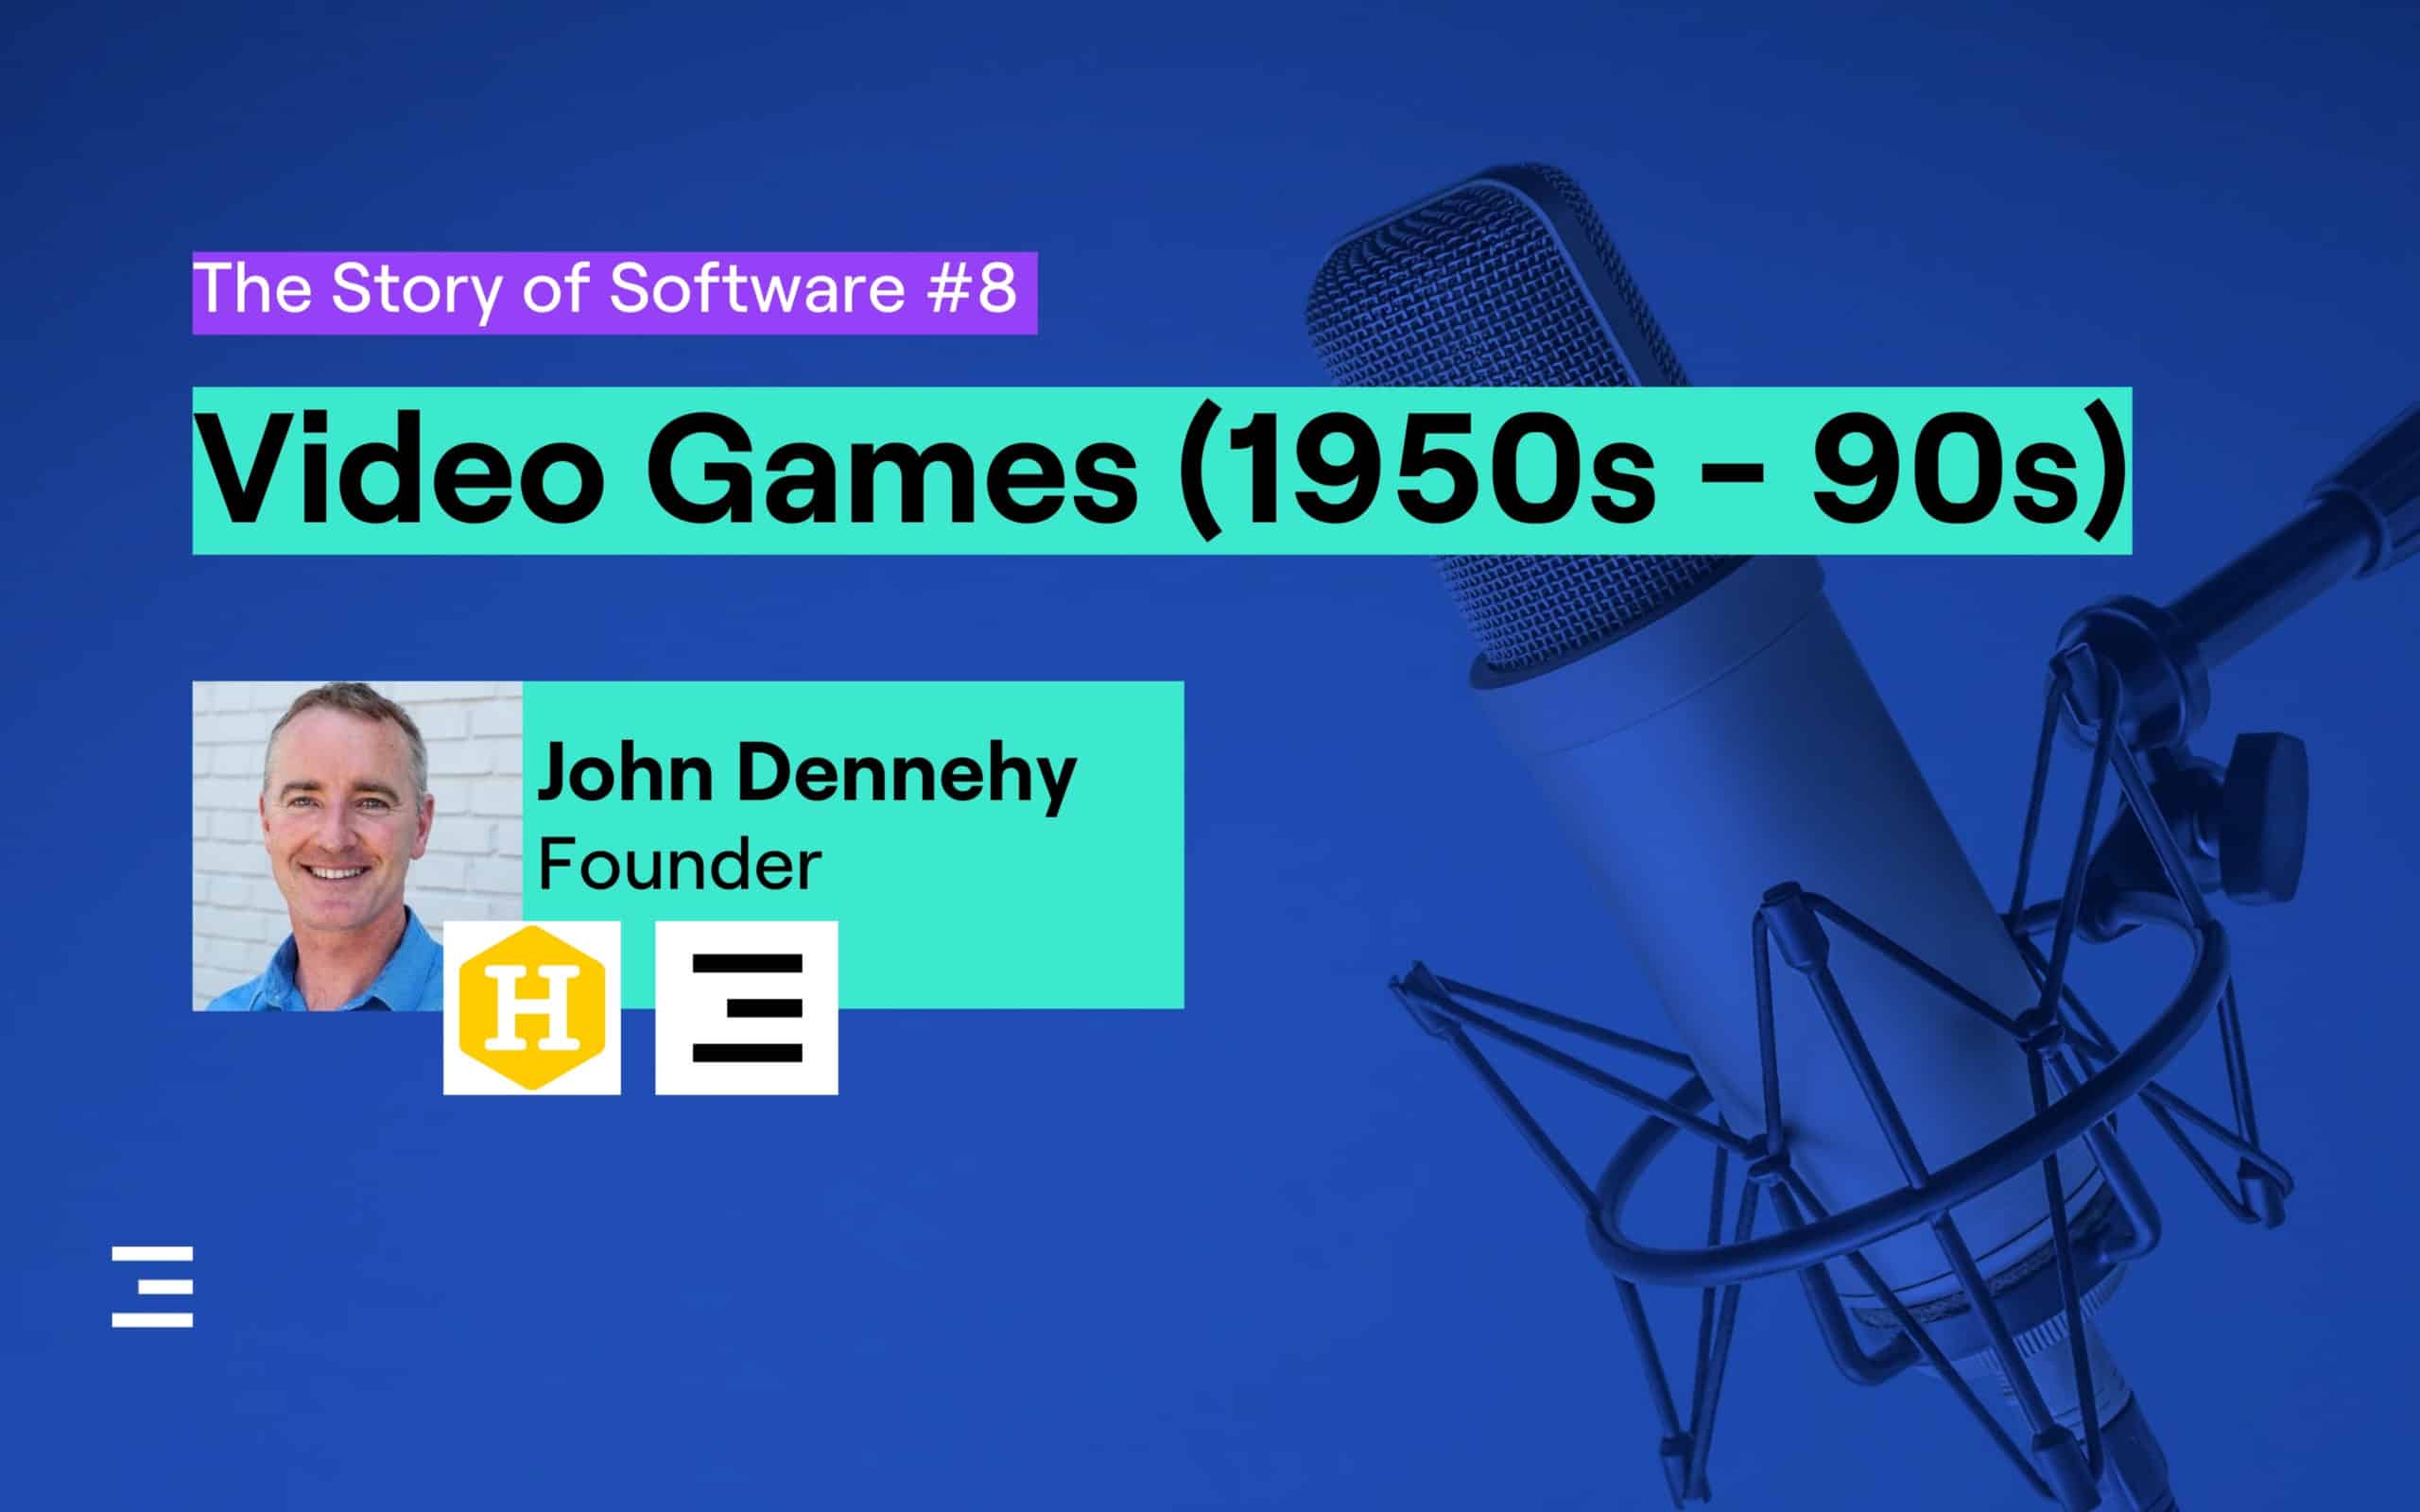 1950s video games to 1990's video games